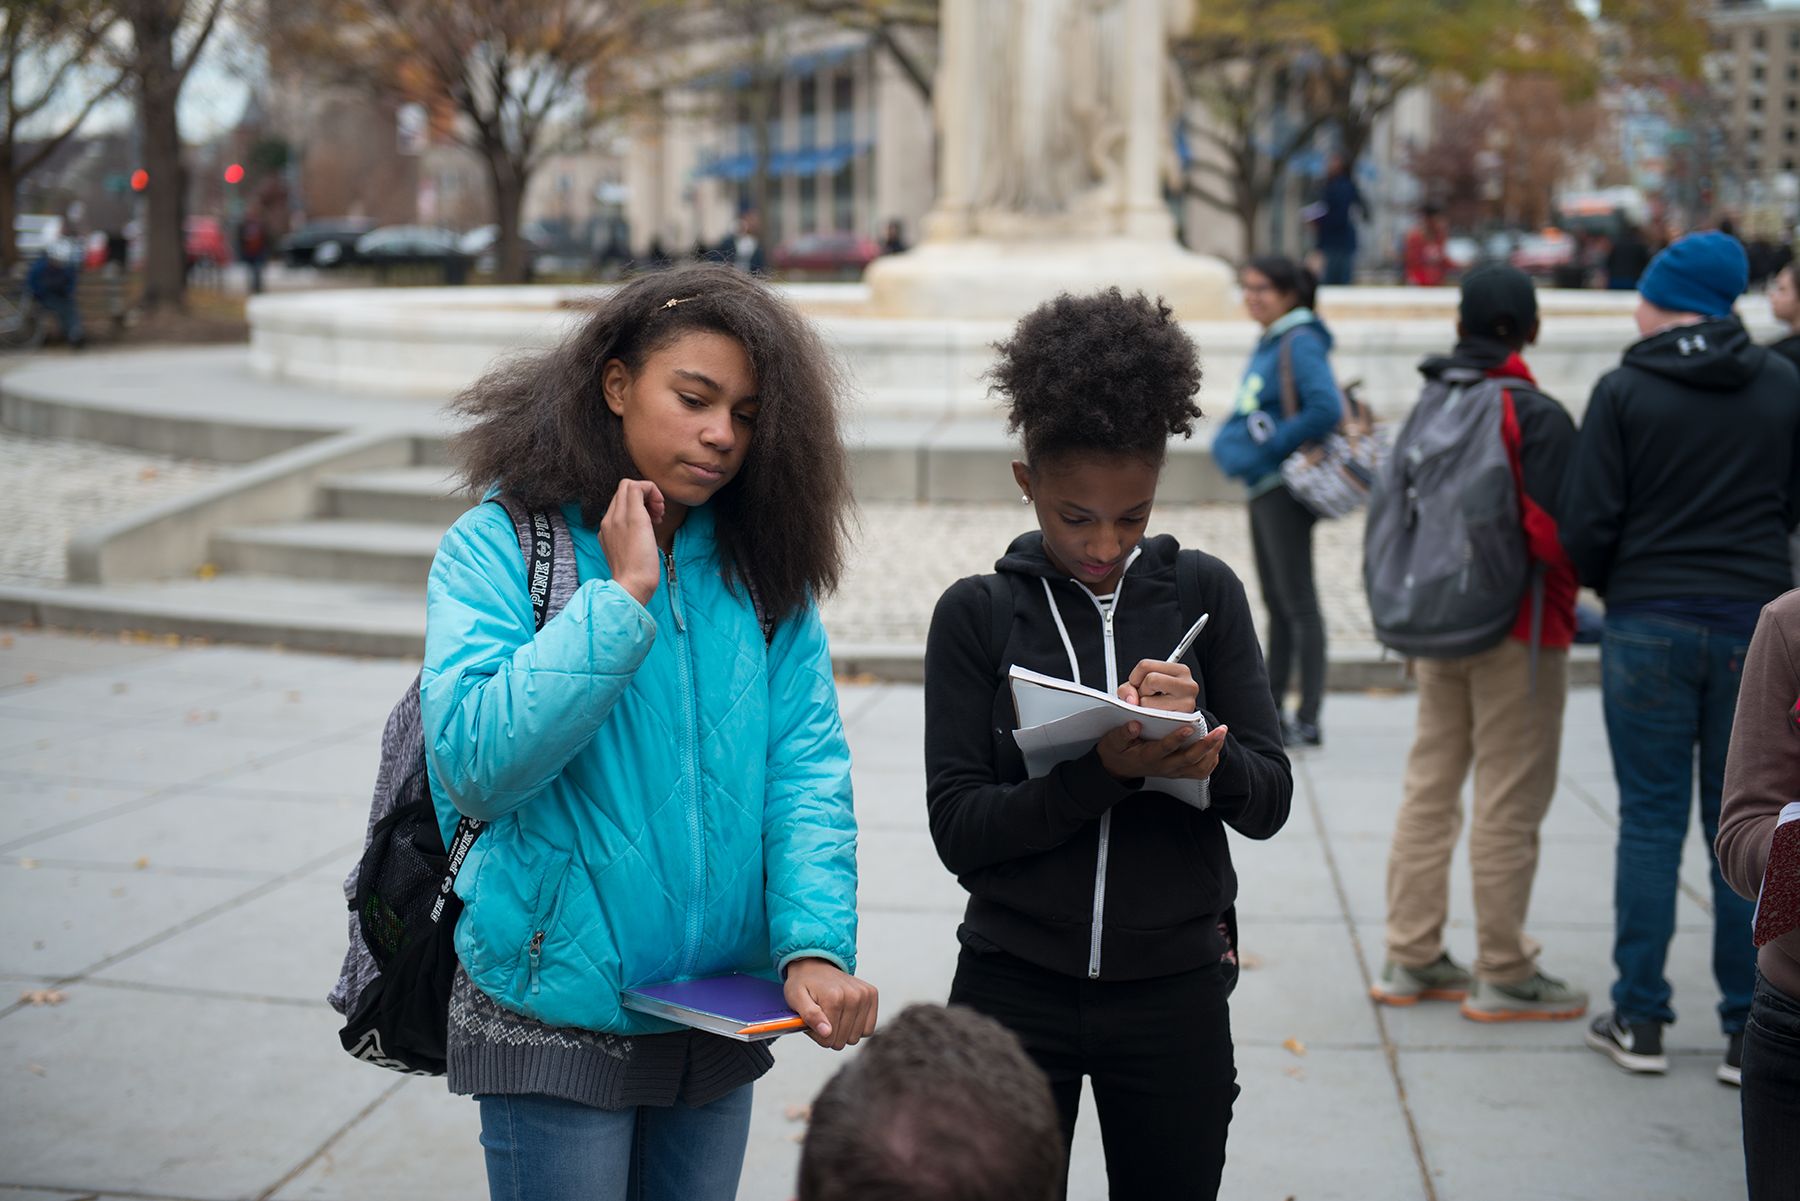 Students from Hardy Middle School conduct interviews in Dupont Circle as part of day two of the "Walk Like a Journalist" workshop, where their eighth grade class practiced observation, interviewing and reporting around D.C. Image by Jordan Roth. Washington, D.C., 2017.